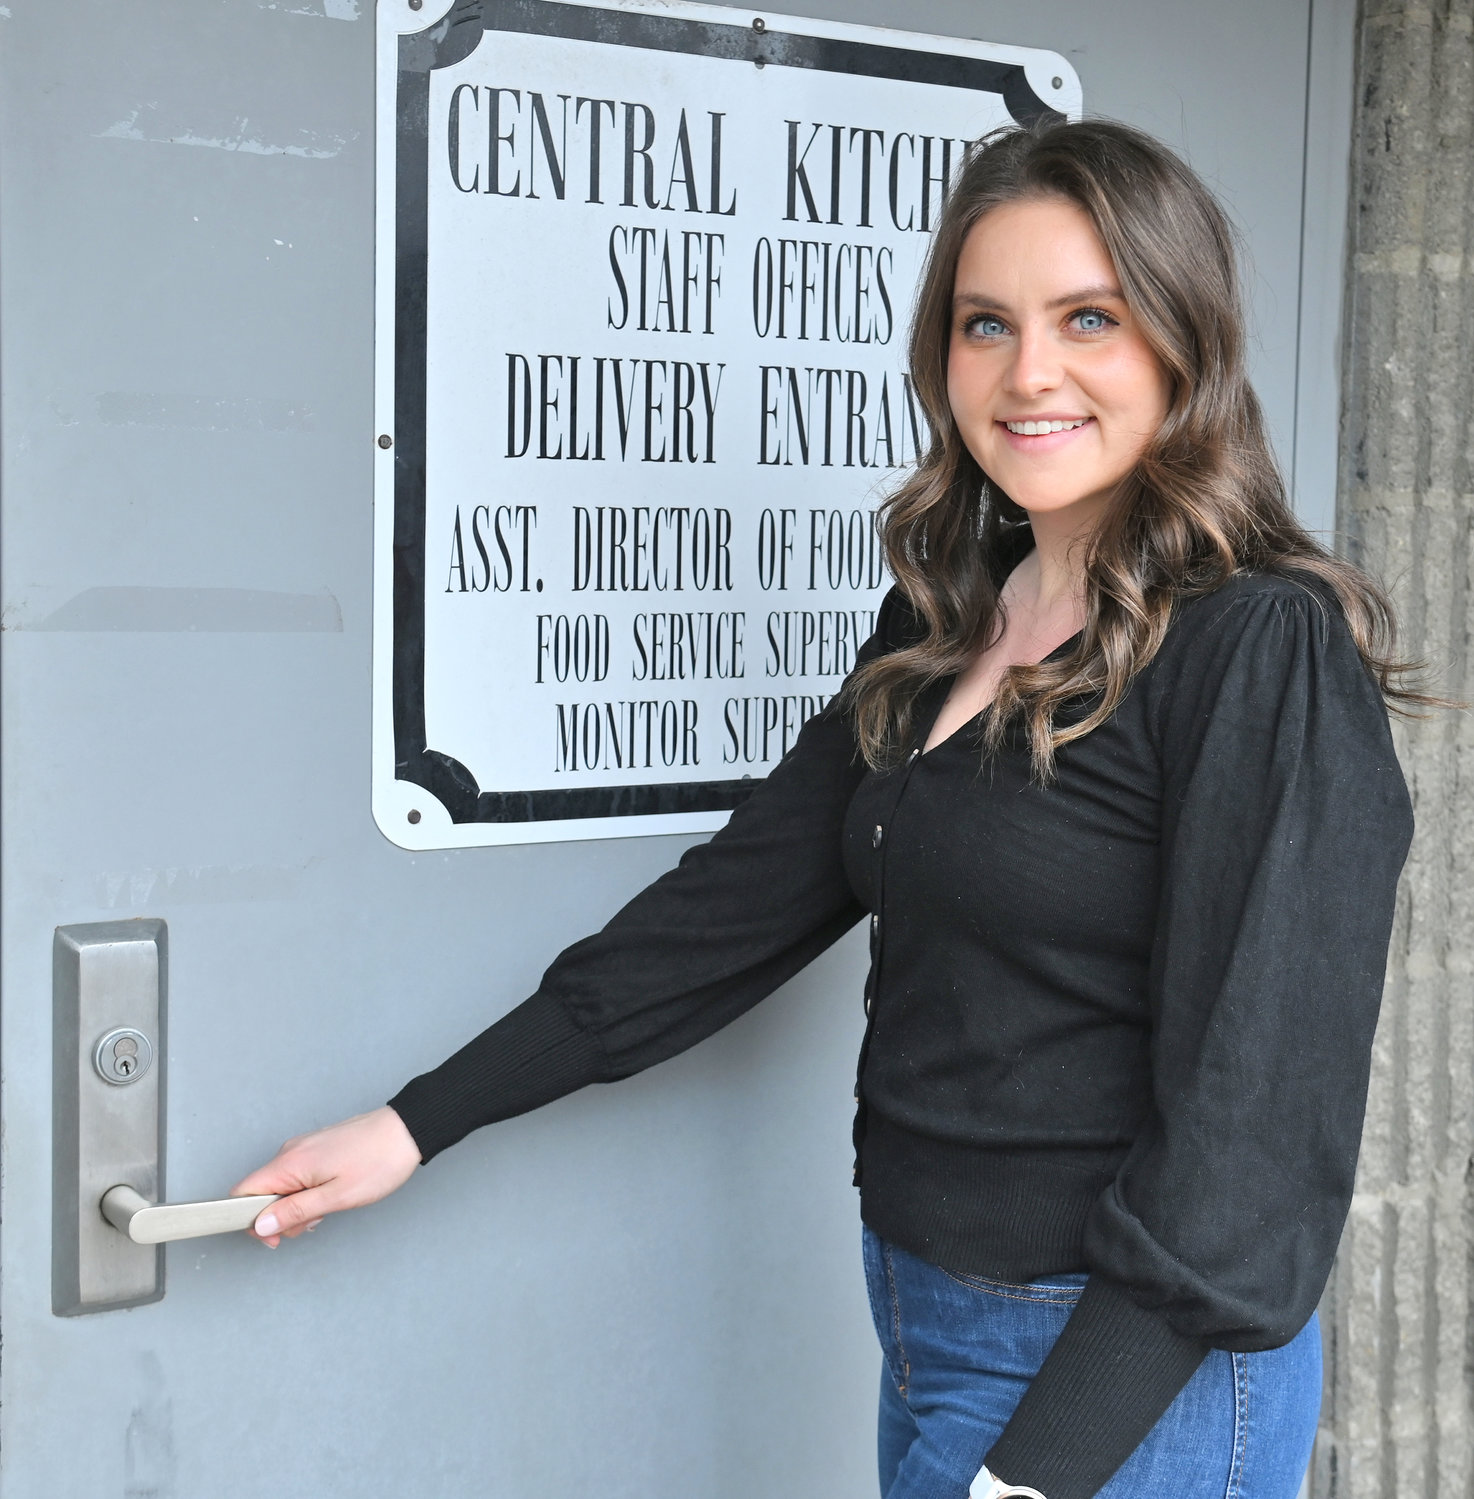 OHM BOCES and Utica City School District Registered Dietitian Nutritionist Hayley Mielnicki poses Friday, March 3 at the entrance of the Central Kitchen on Elizabeth Street in Utica.